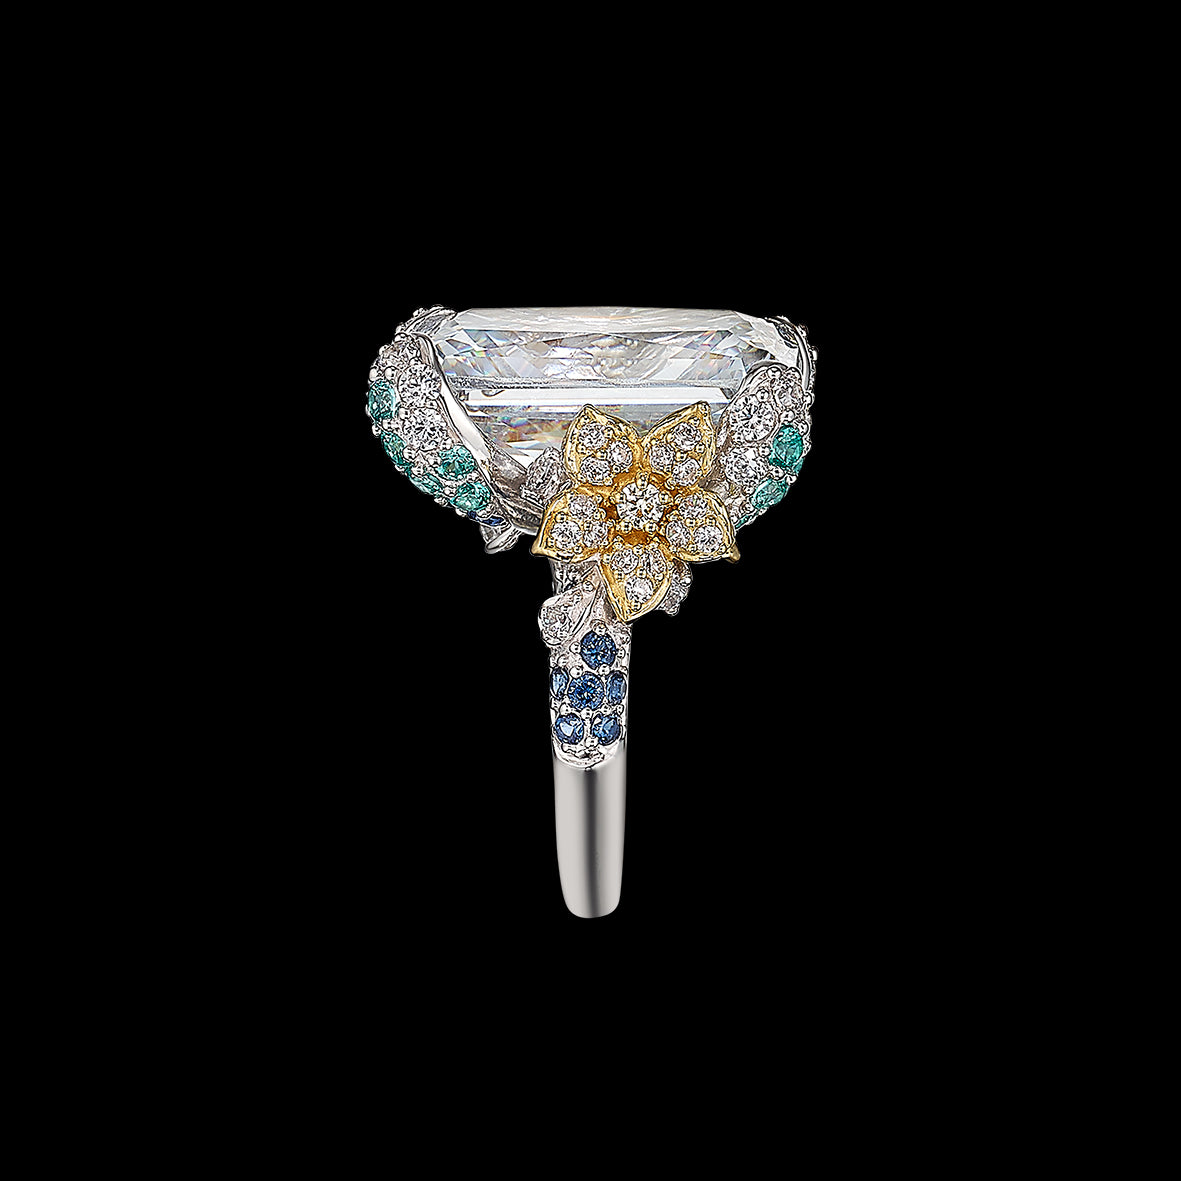 Diamond Cinderella Ring, Ring, English Garden, Anabela Chan Joaillerie - Fine jewelry with laboratory grown and created gemstones hand-crafted in the United Kingdom. Anabela Chan Joaillerie is the first fine jewellery brand in the world to champion laboratory-grown and created gemstones with high jewellery design, artisanal craftsmanship and a focus on ethical and sustainable innovations.